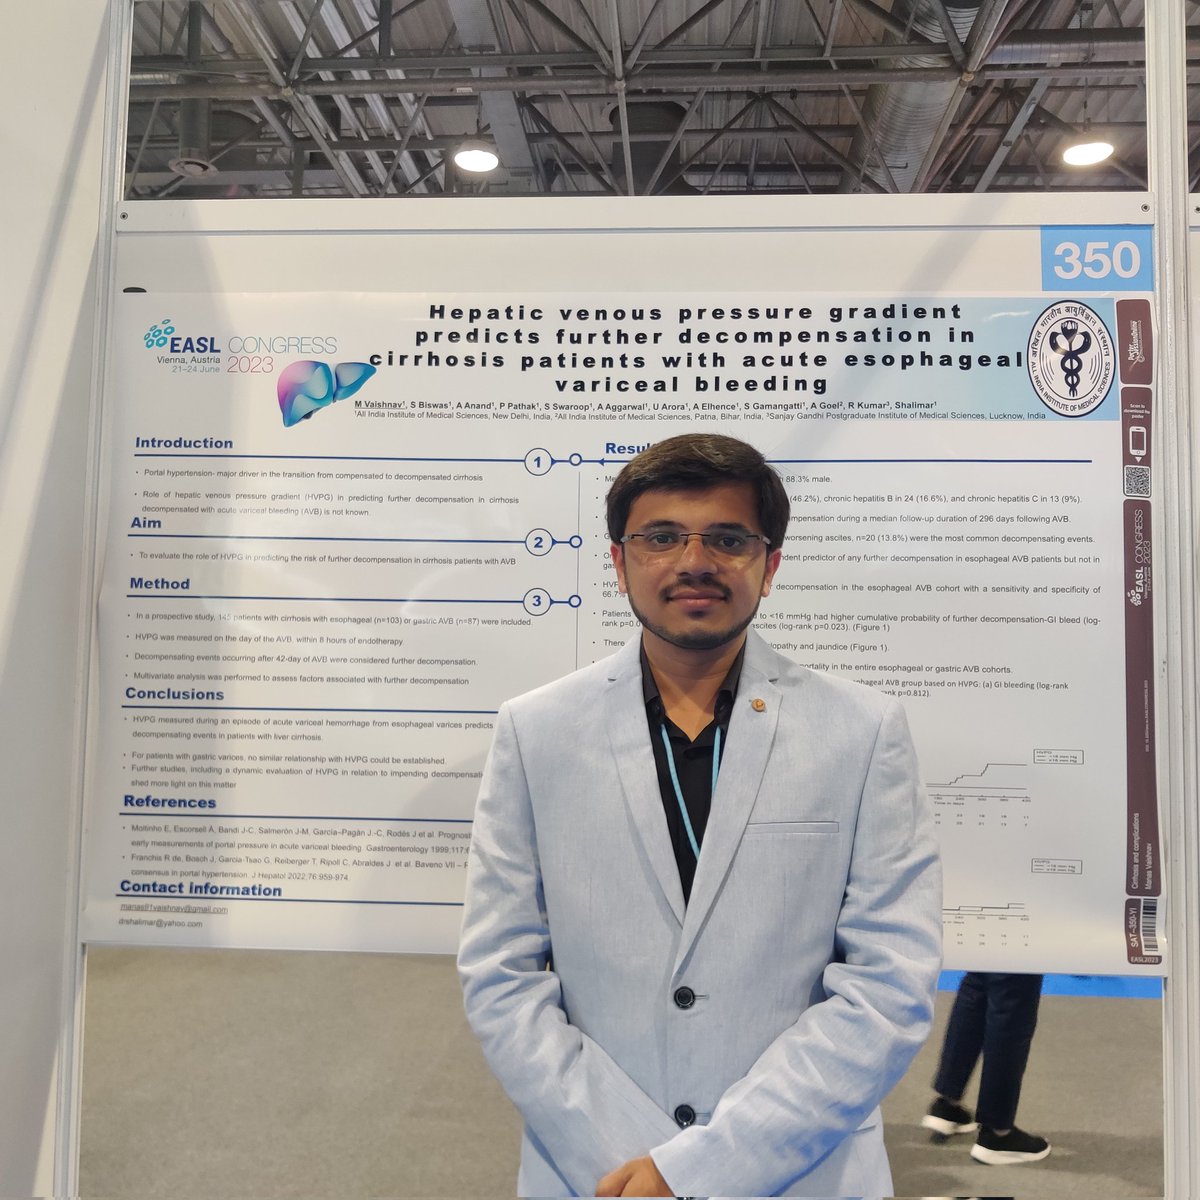 Had good opportunity to present our short course terlipressin trial in AVB🩸at #EASLCongress. Also presented poster on further decompensation after AVB.
Thanks to team lead by @drshalimar for all the guidance @aiims_newdelhi @abhinav_anand28 @JustSagnik @elhence_anshu 
@EASLnews